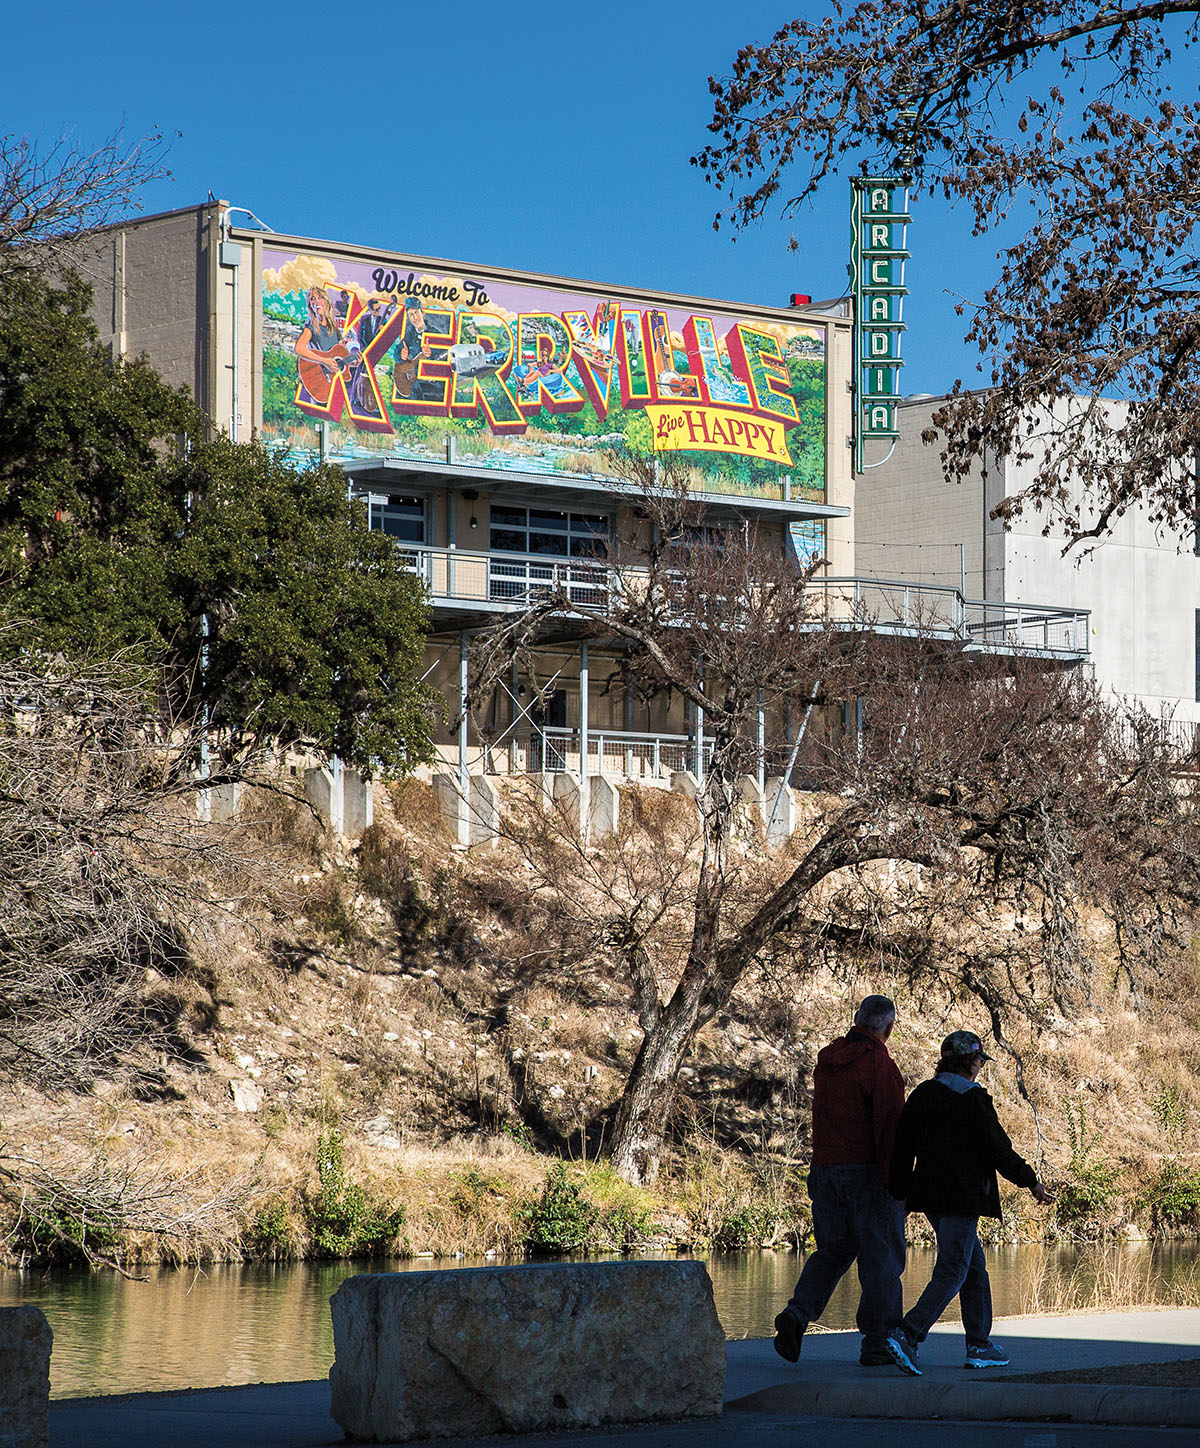 A mural reading "Kerrville" above a small hill where two people are walking